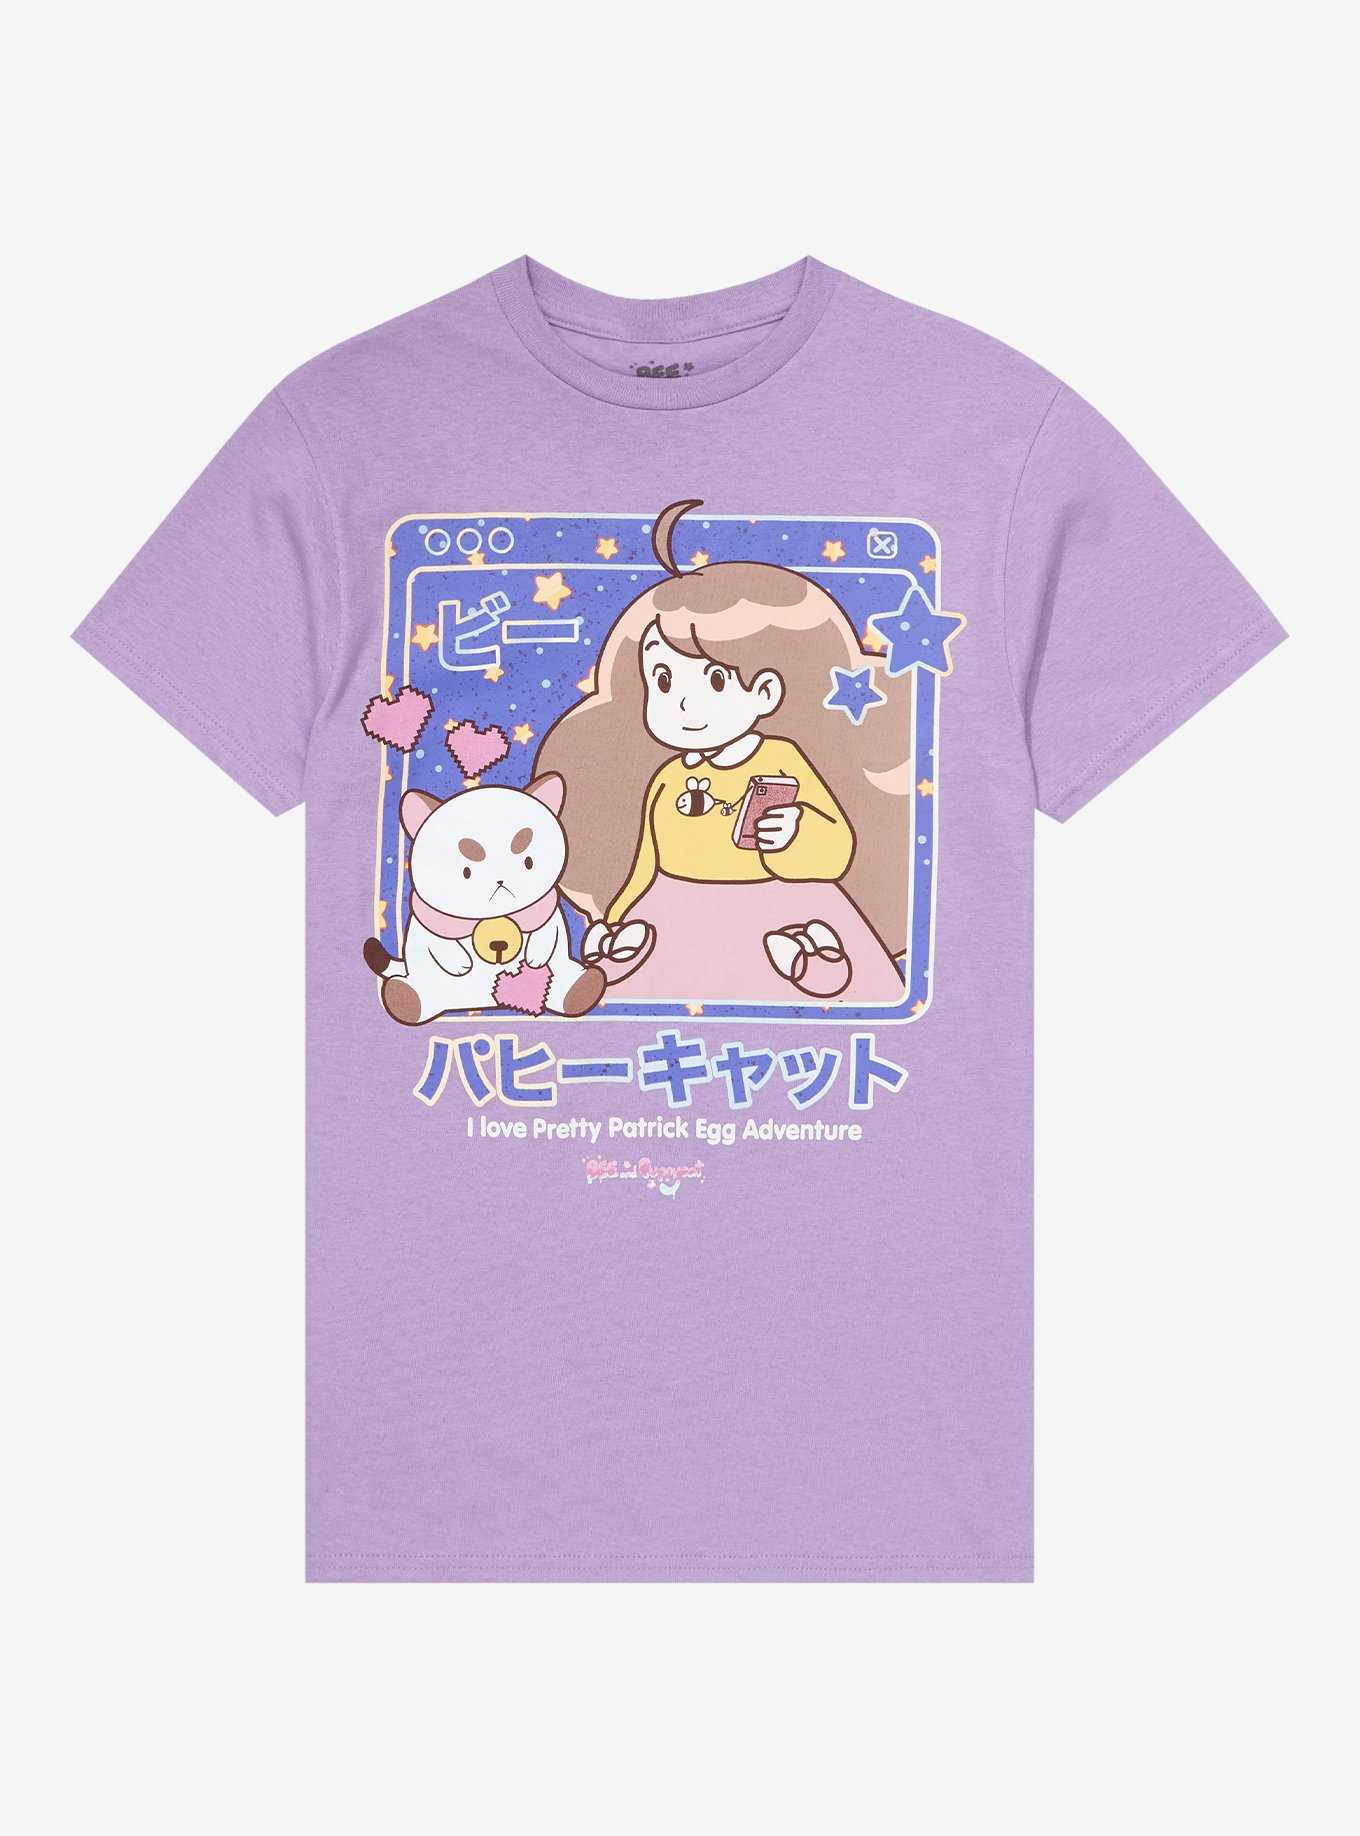 Bee And PuppyCat: Lazy In Space Duo Boyfriend Fit Girls T-Shirt, , hi-res